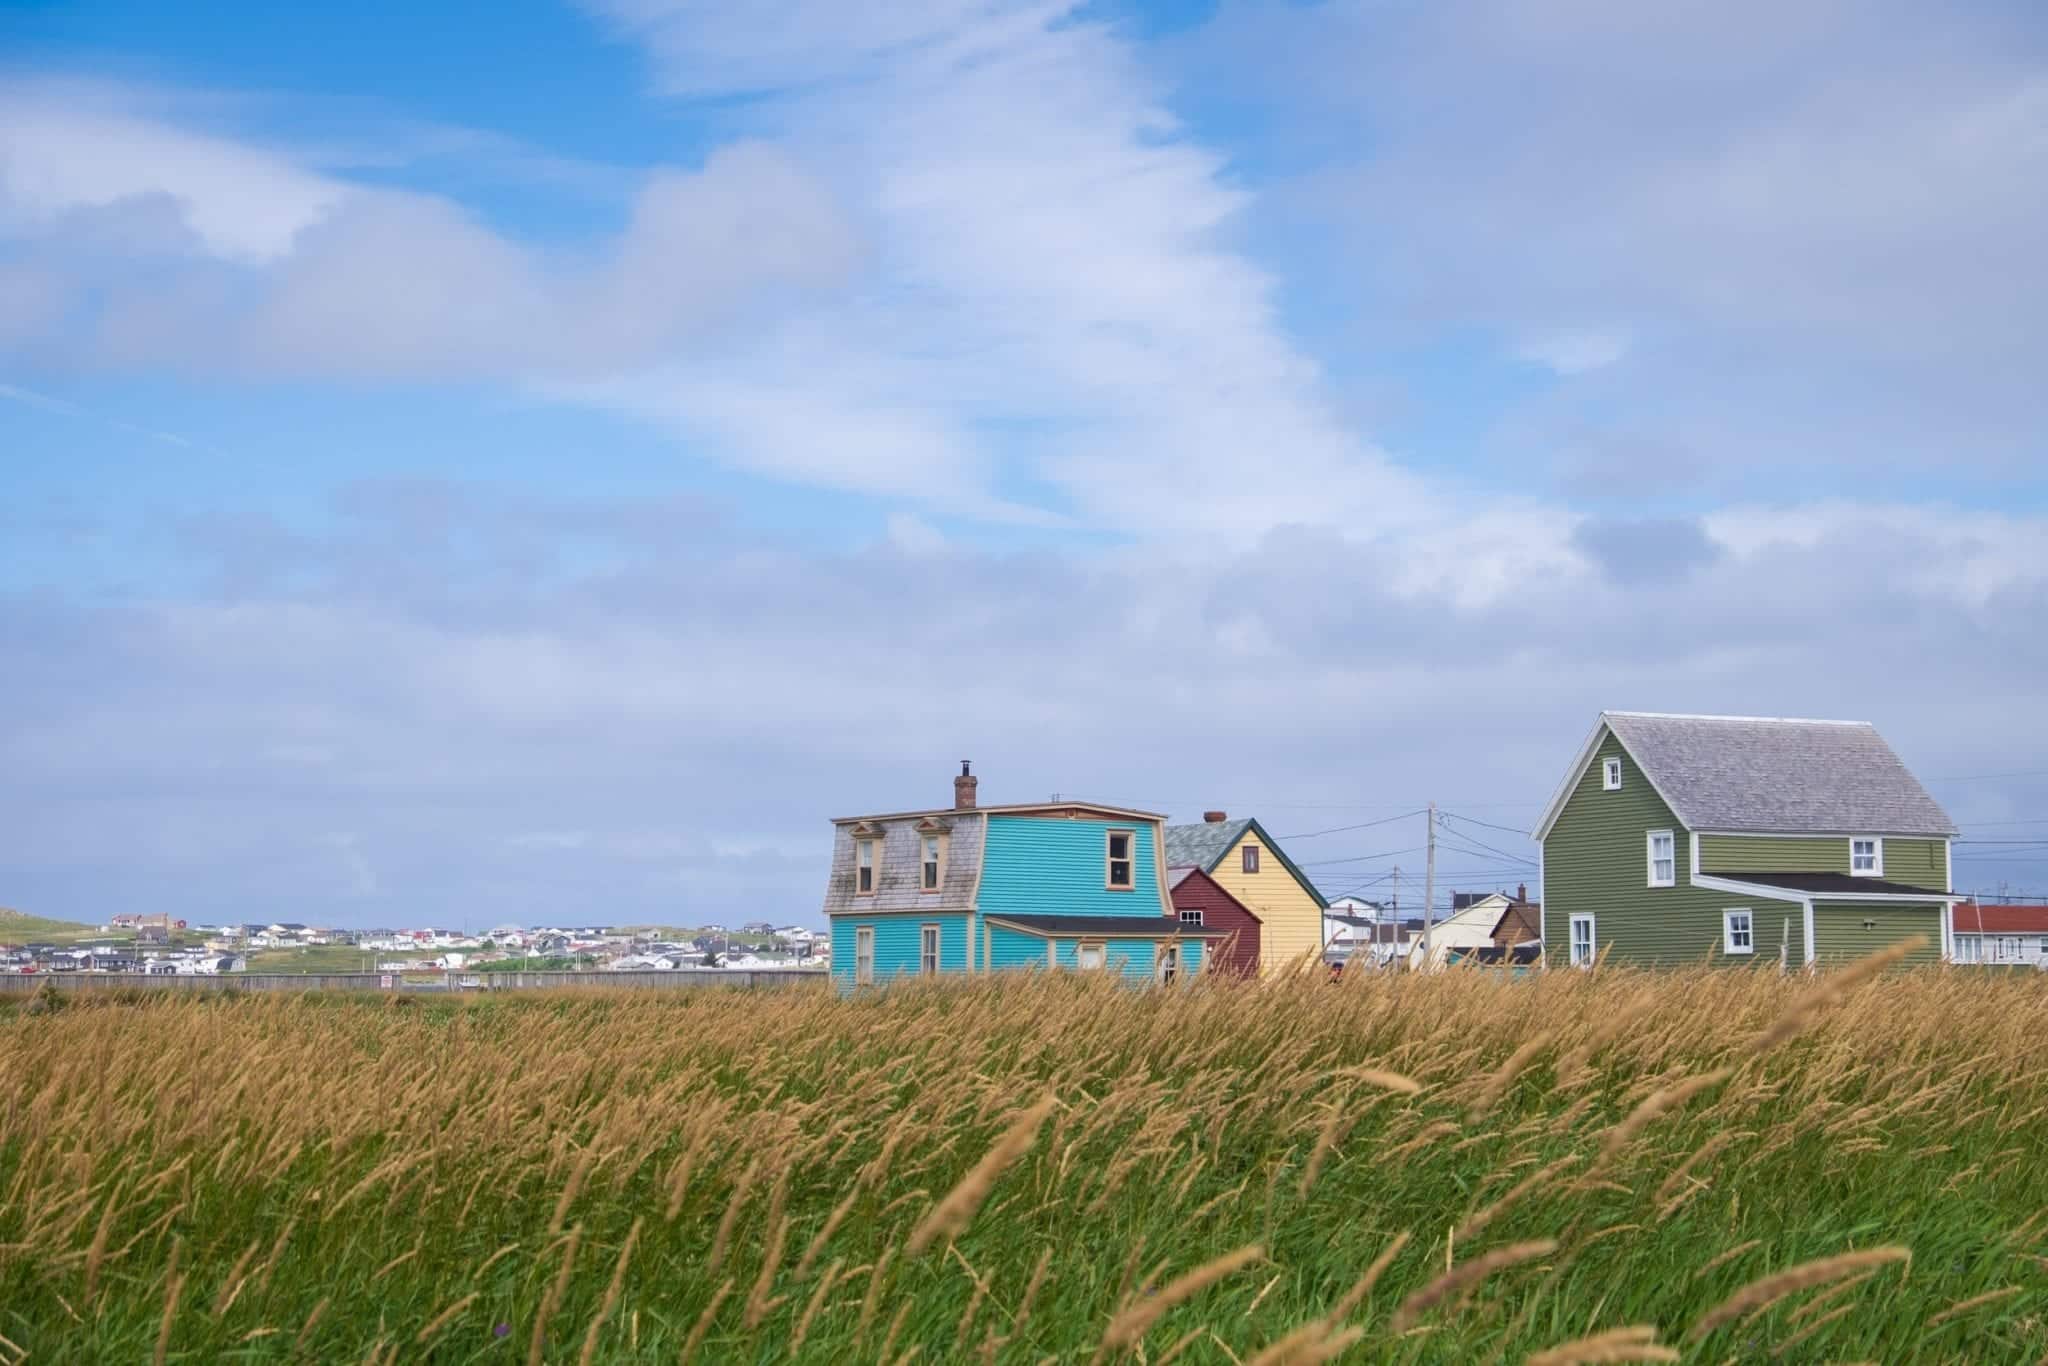 Two houses, one turquoise and one pea green, on a grassy landscape in Bonavista, Newfoundland.